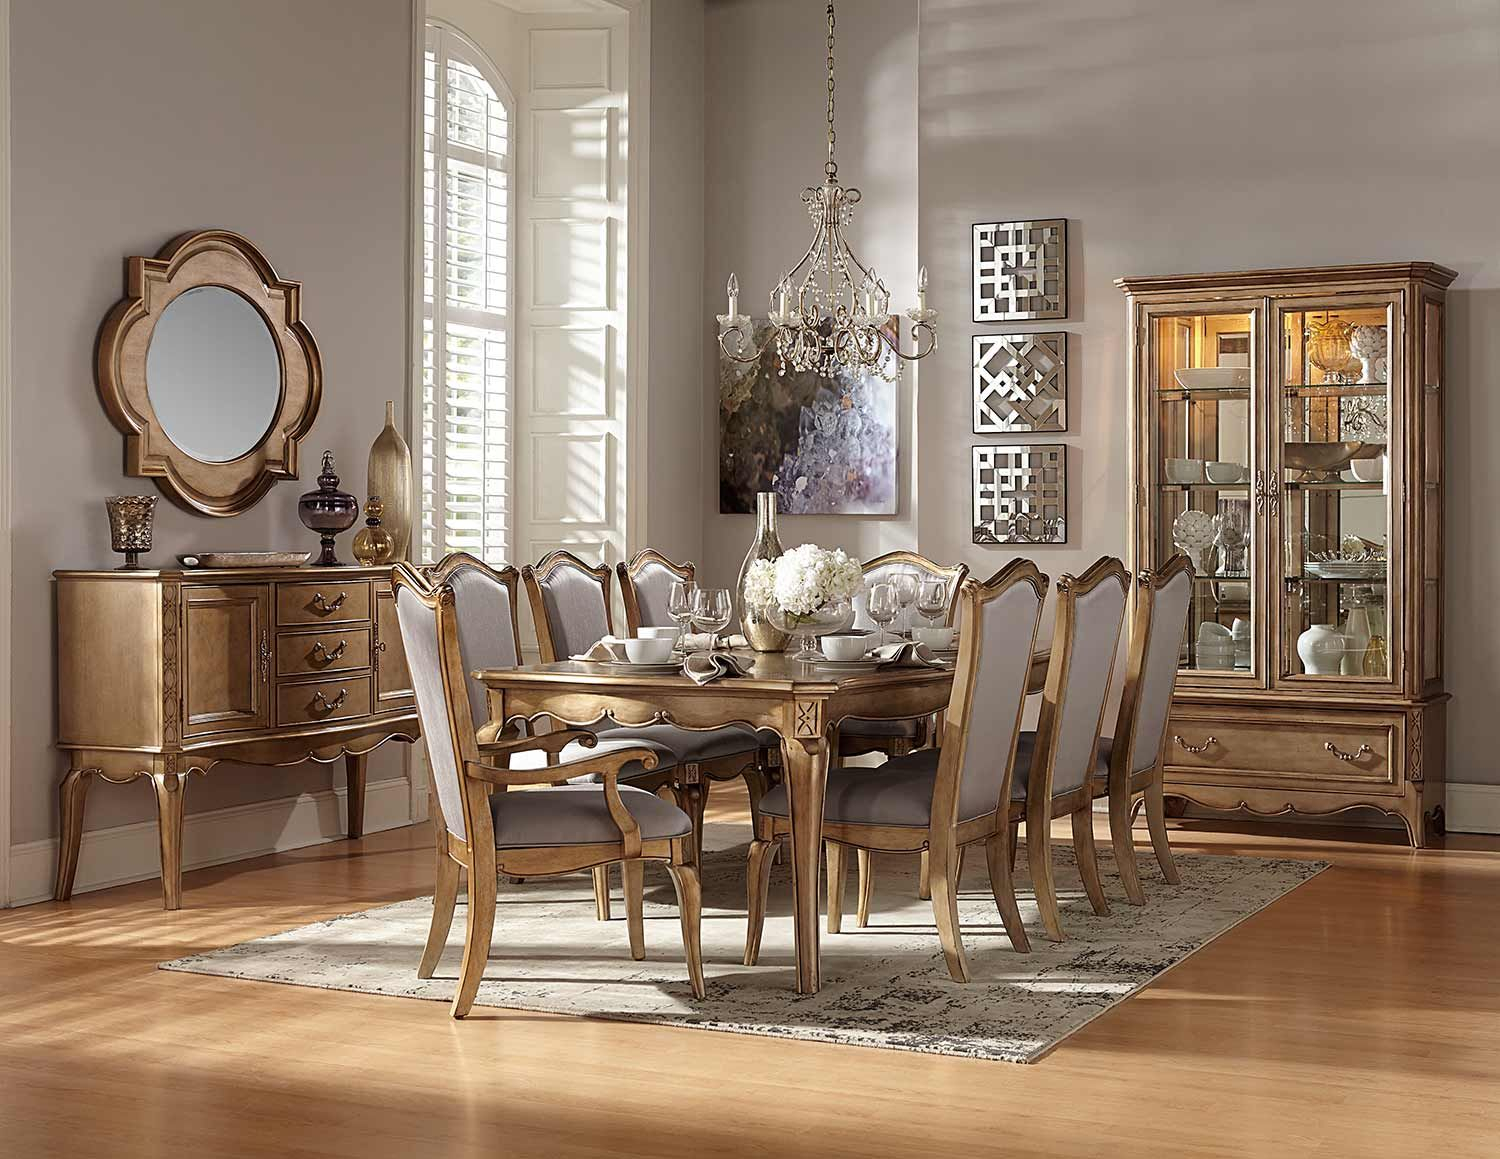 Dining Room Decorating Ideas Rustic Gold